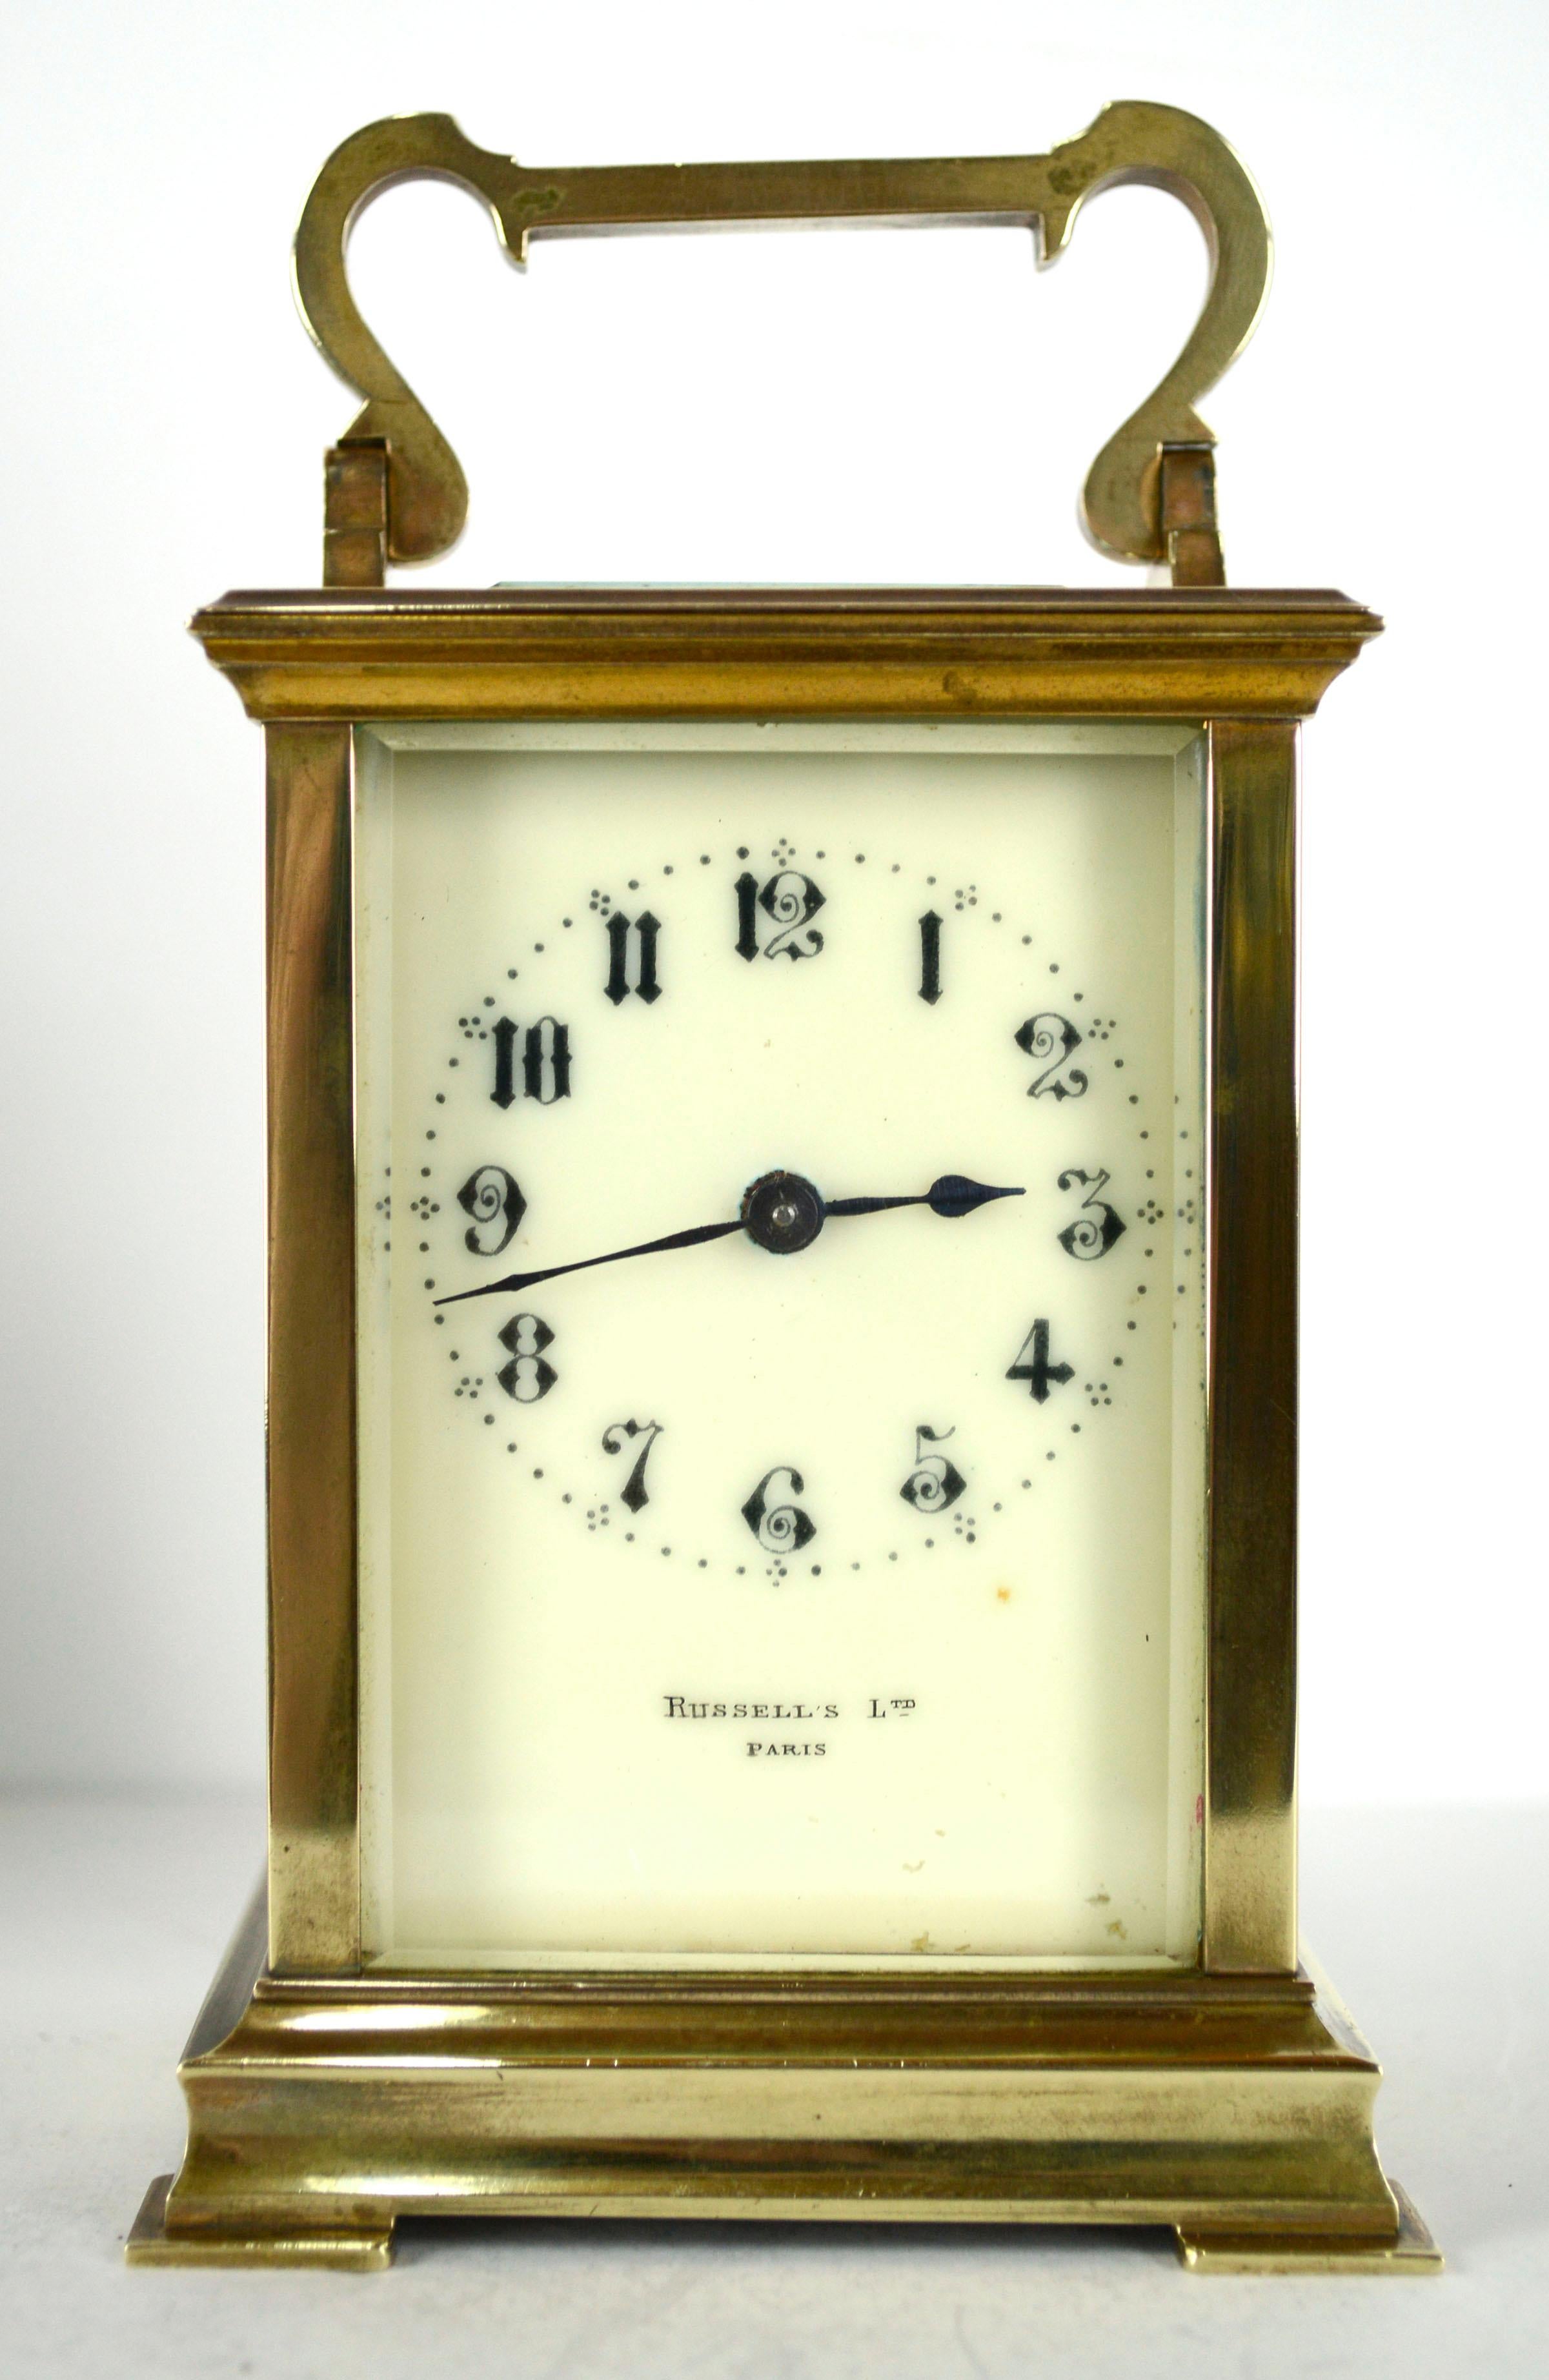 19th Century French Couaillet Freres Carriage Clock of Saint-Nicolas-D'Aliermont, Russell's